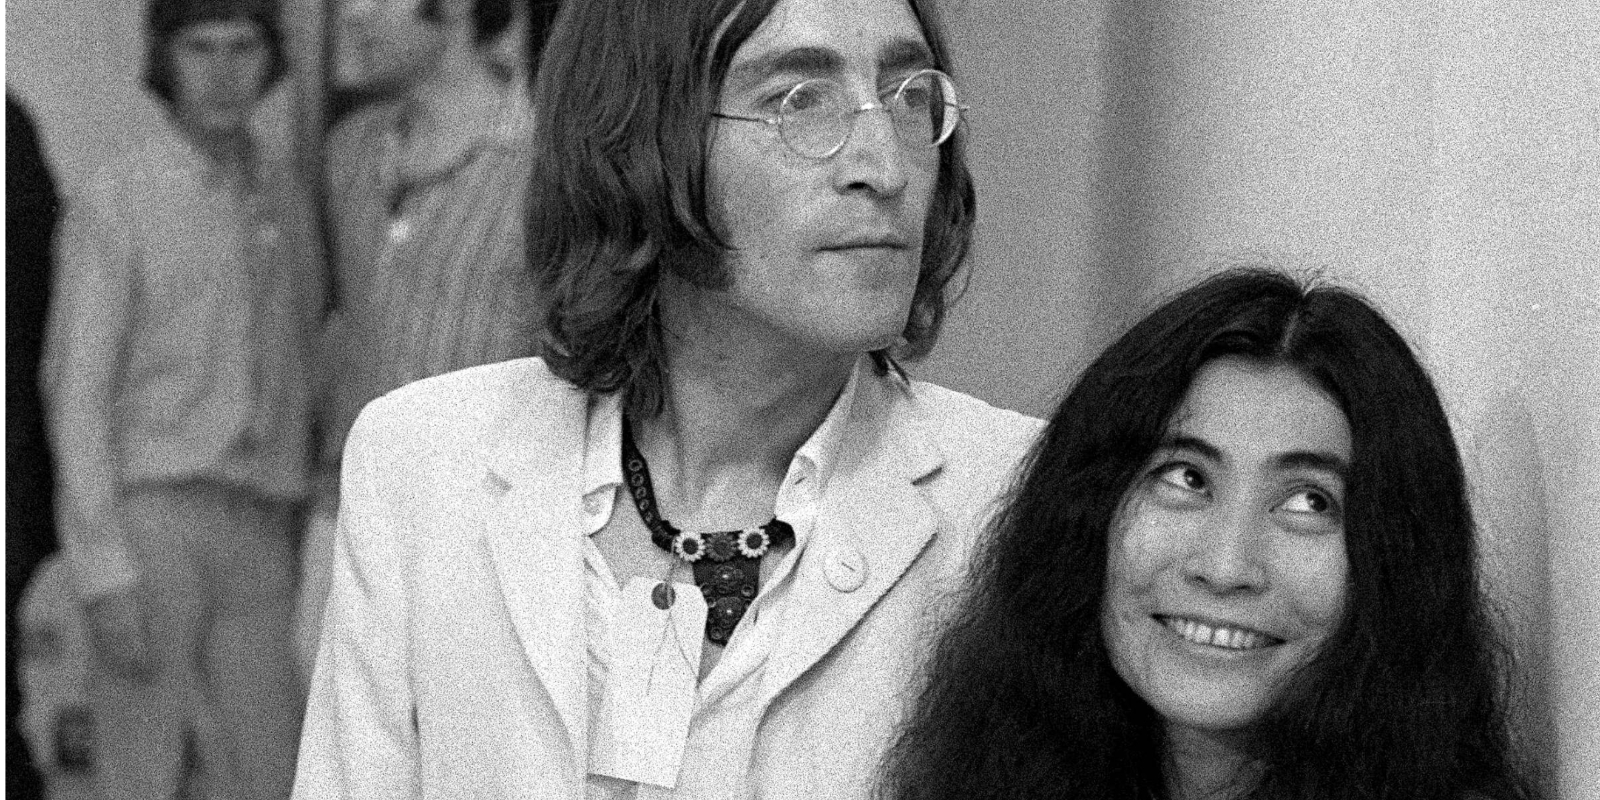 John Lennon and Yoko Ono at the opening of John's You Are Here exhibition at the Robert Fraser Gallery, Mayfair.